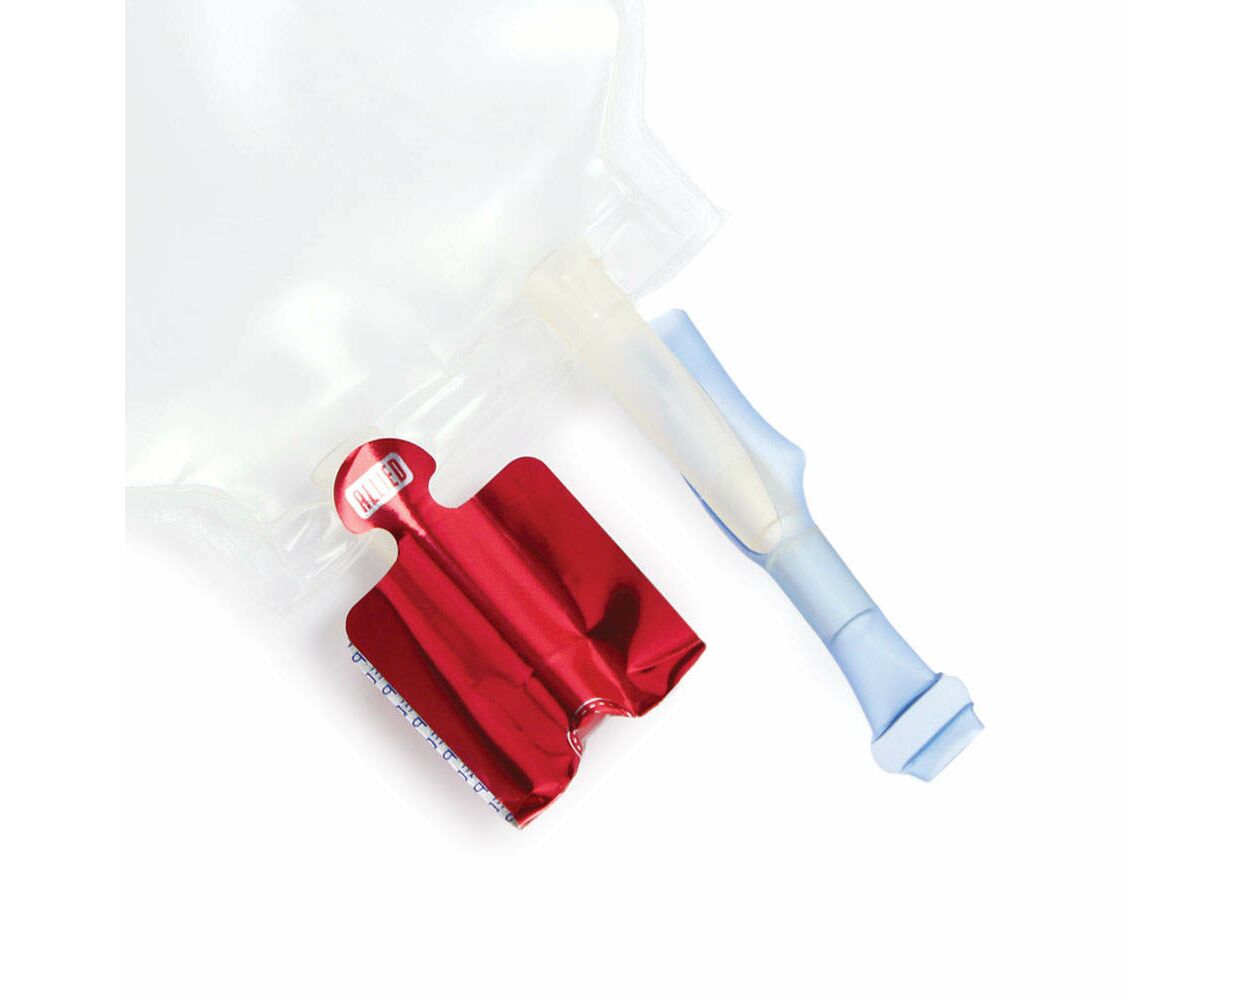 Tamper Evident IV Bag Labels Products, Supplies and Equipment